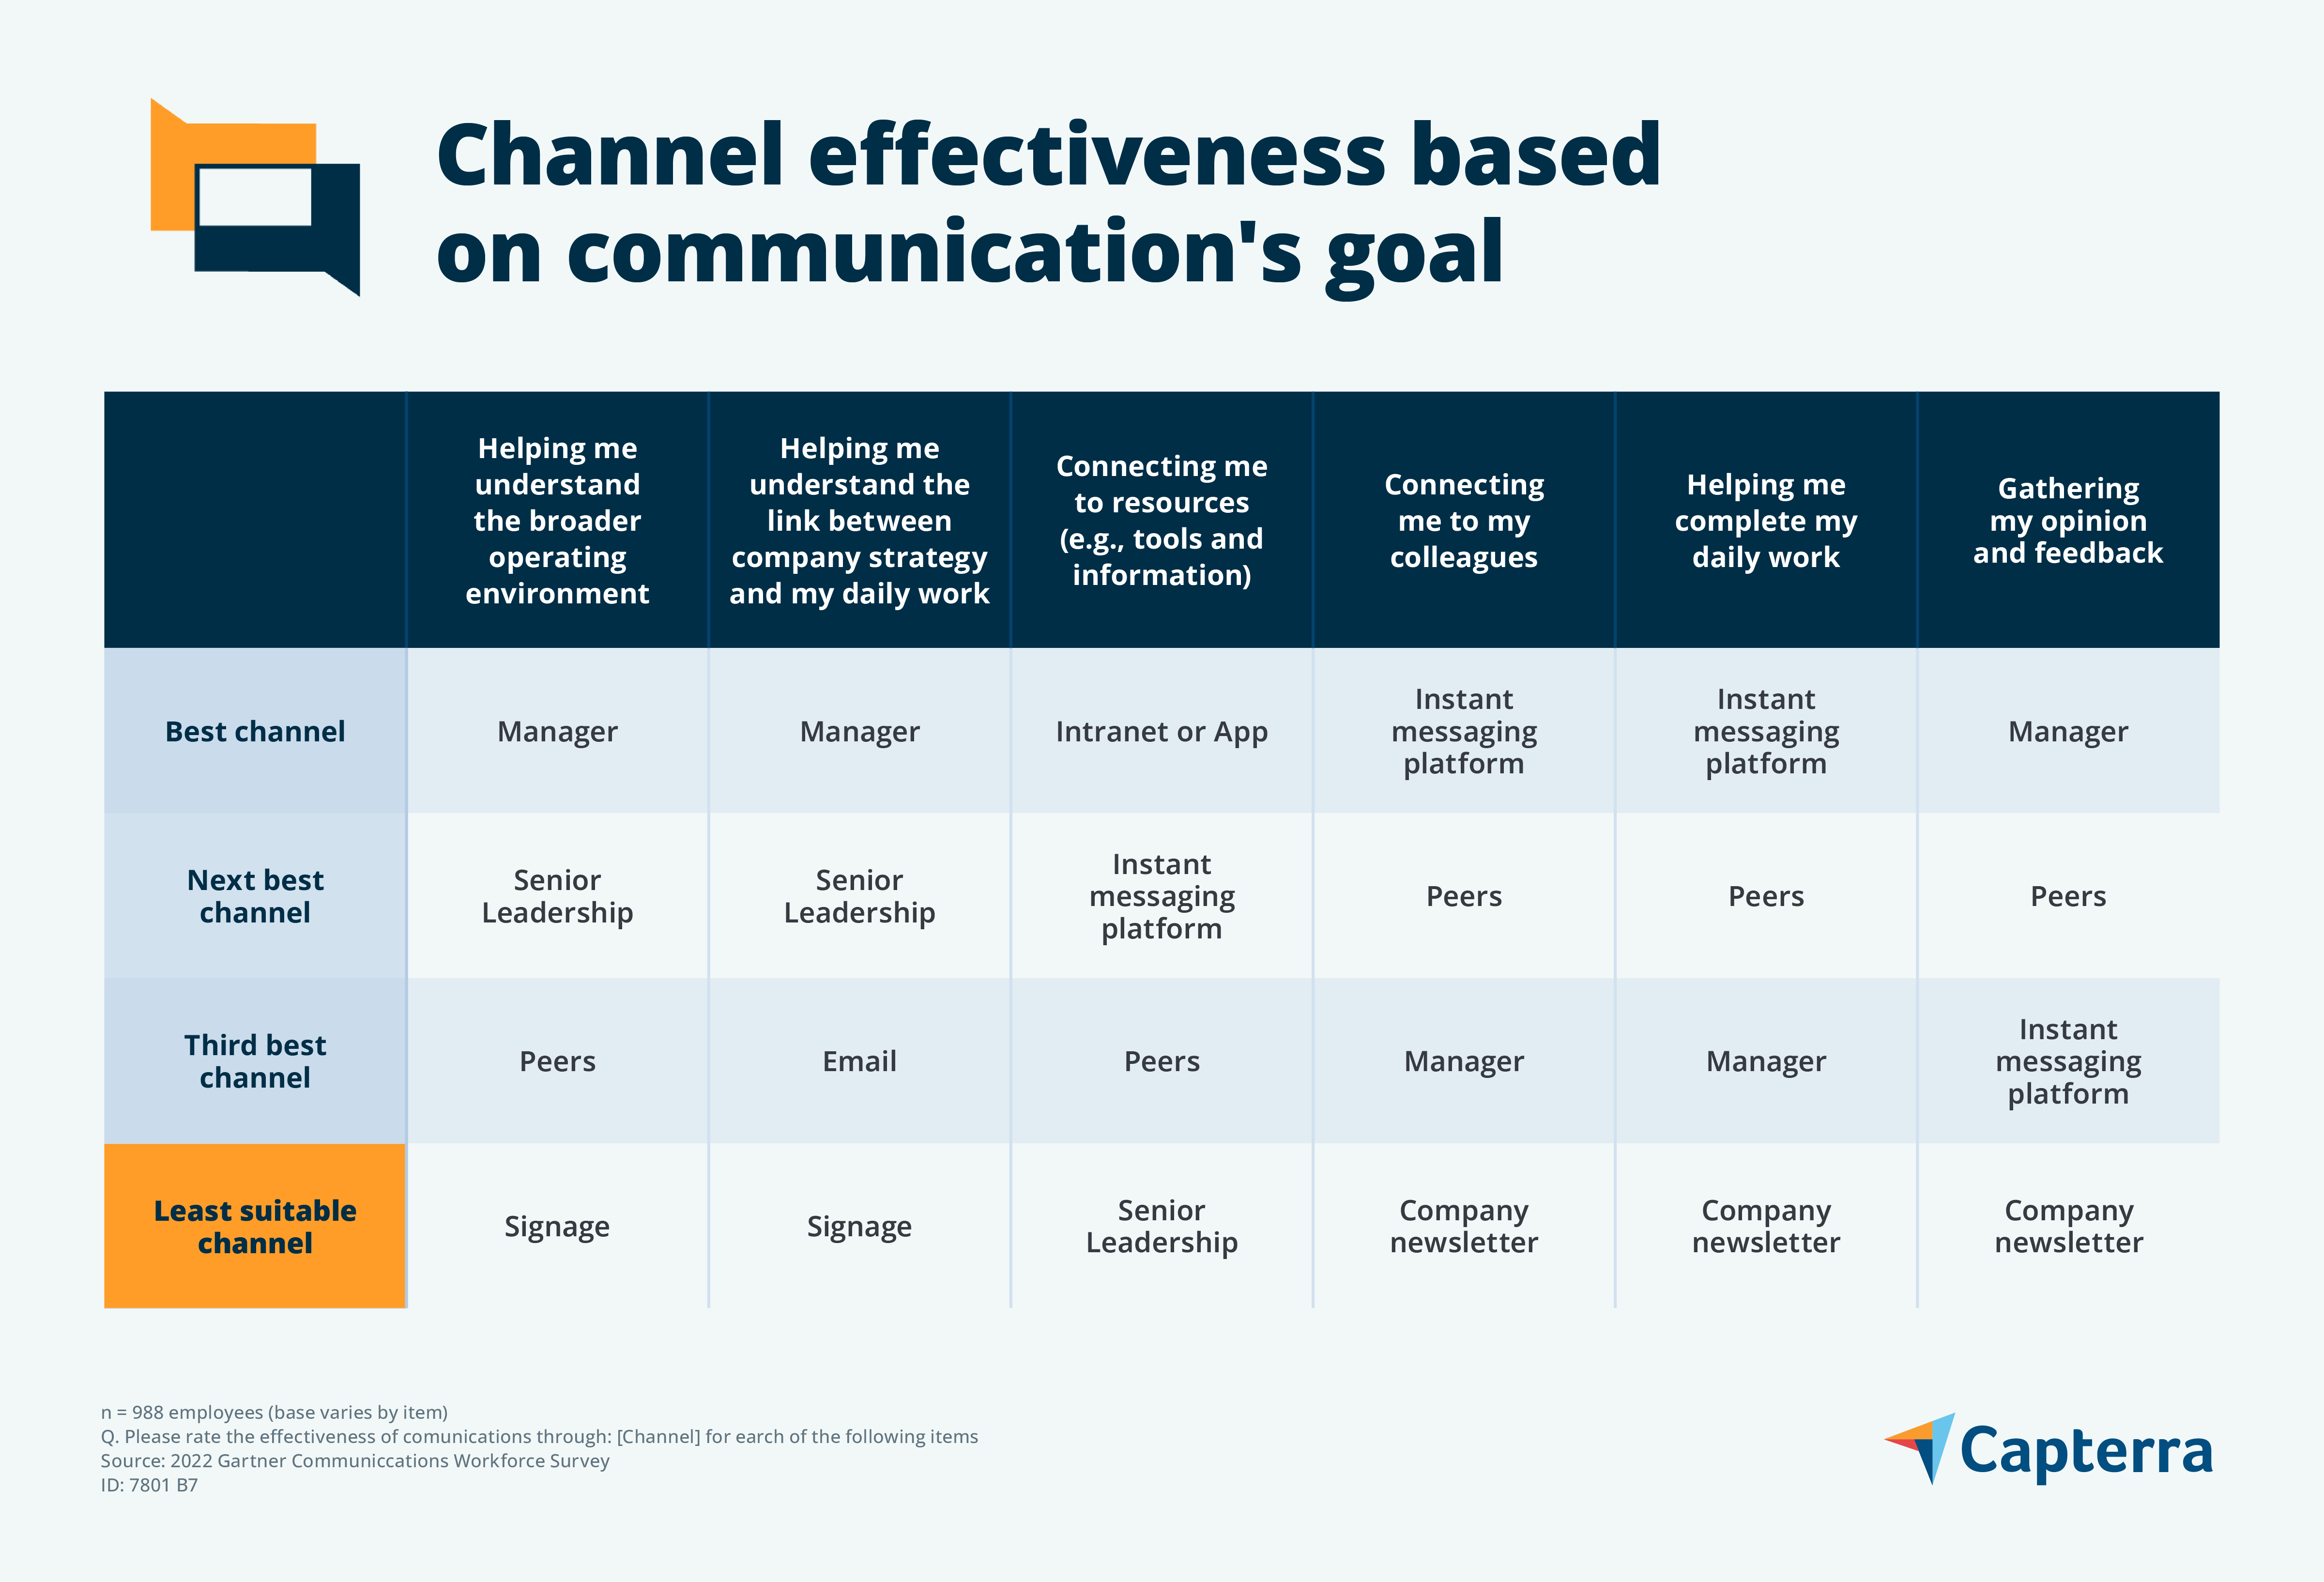 Channel effectiveness by goal summary graphic (Capterra version) for the blog article "How To Build an HR Communication Plan"